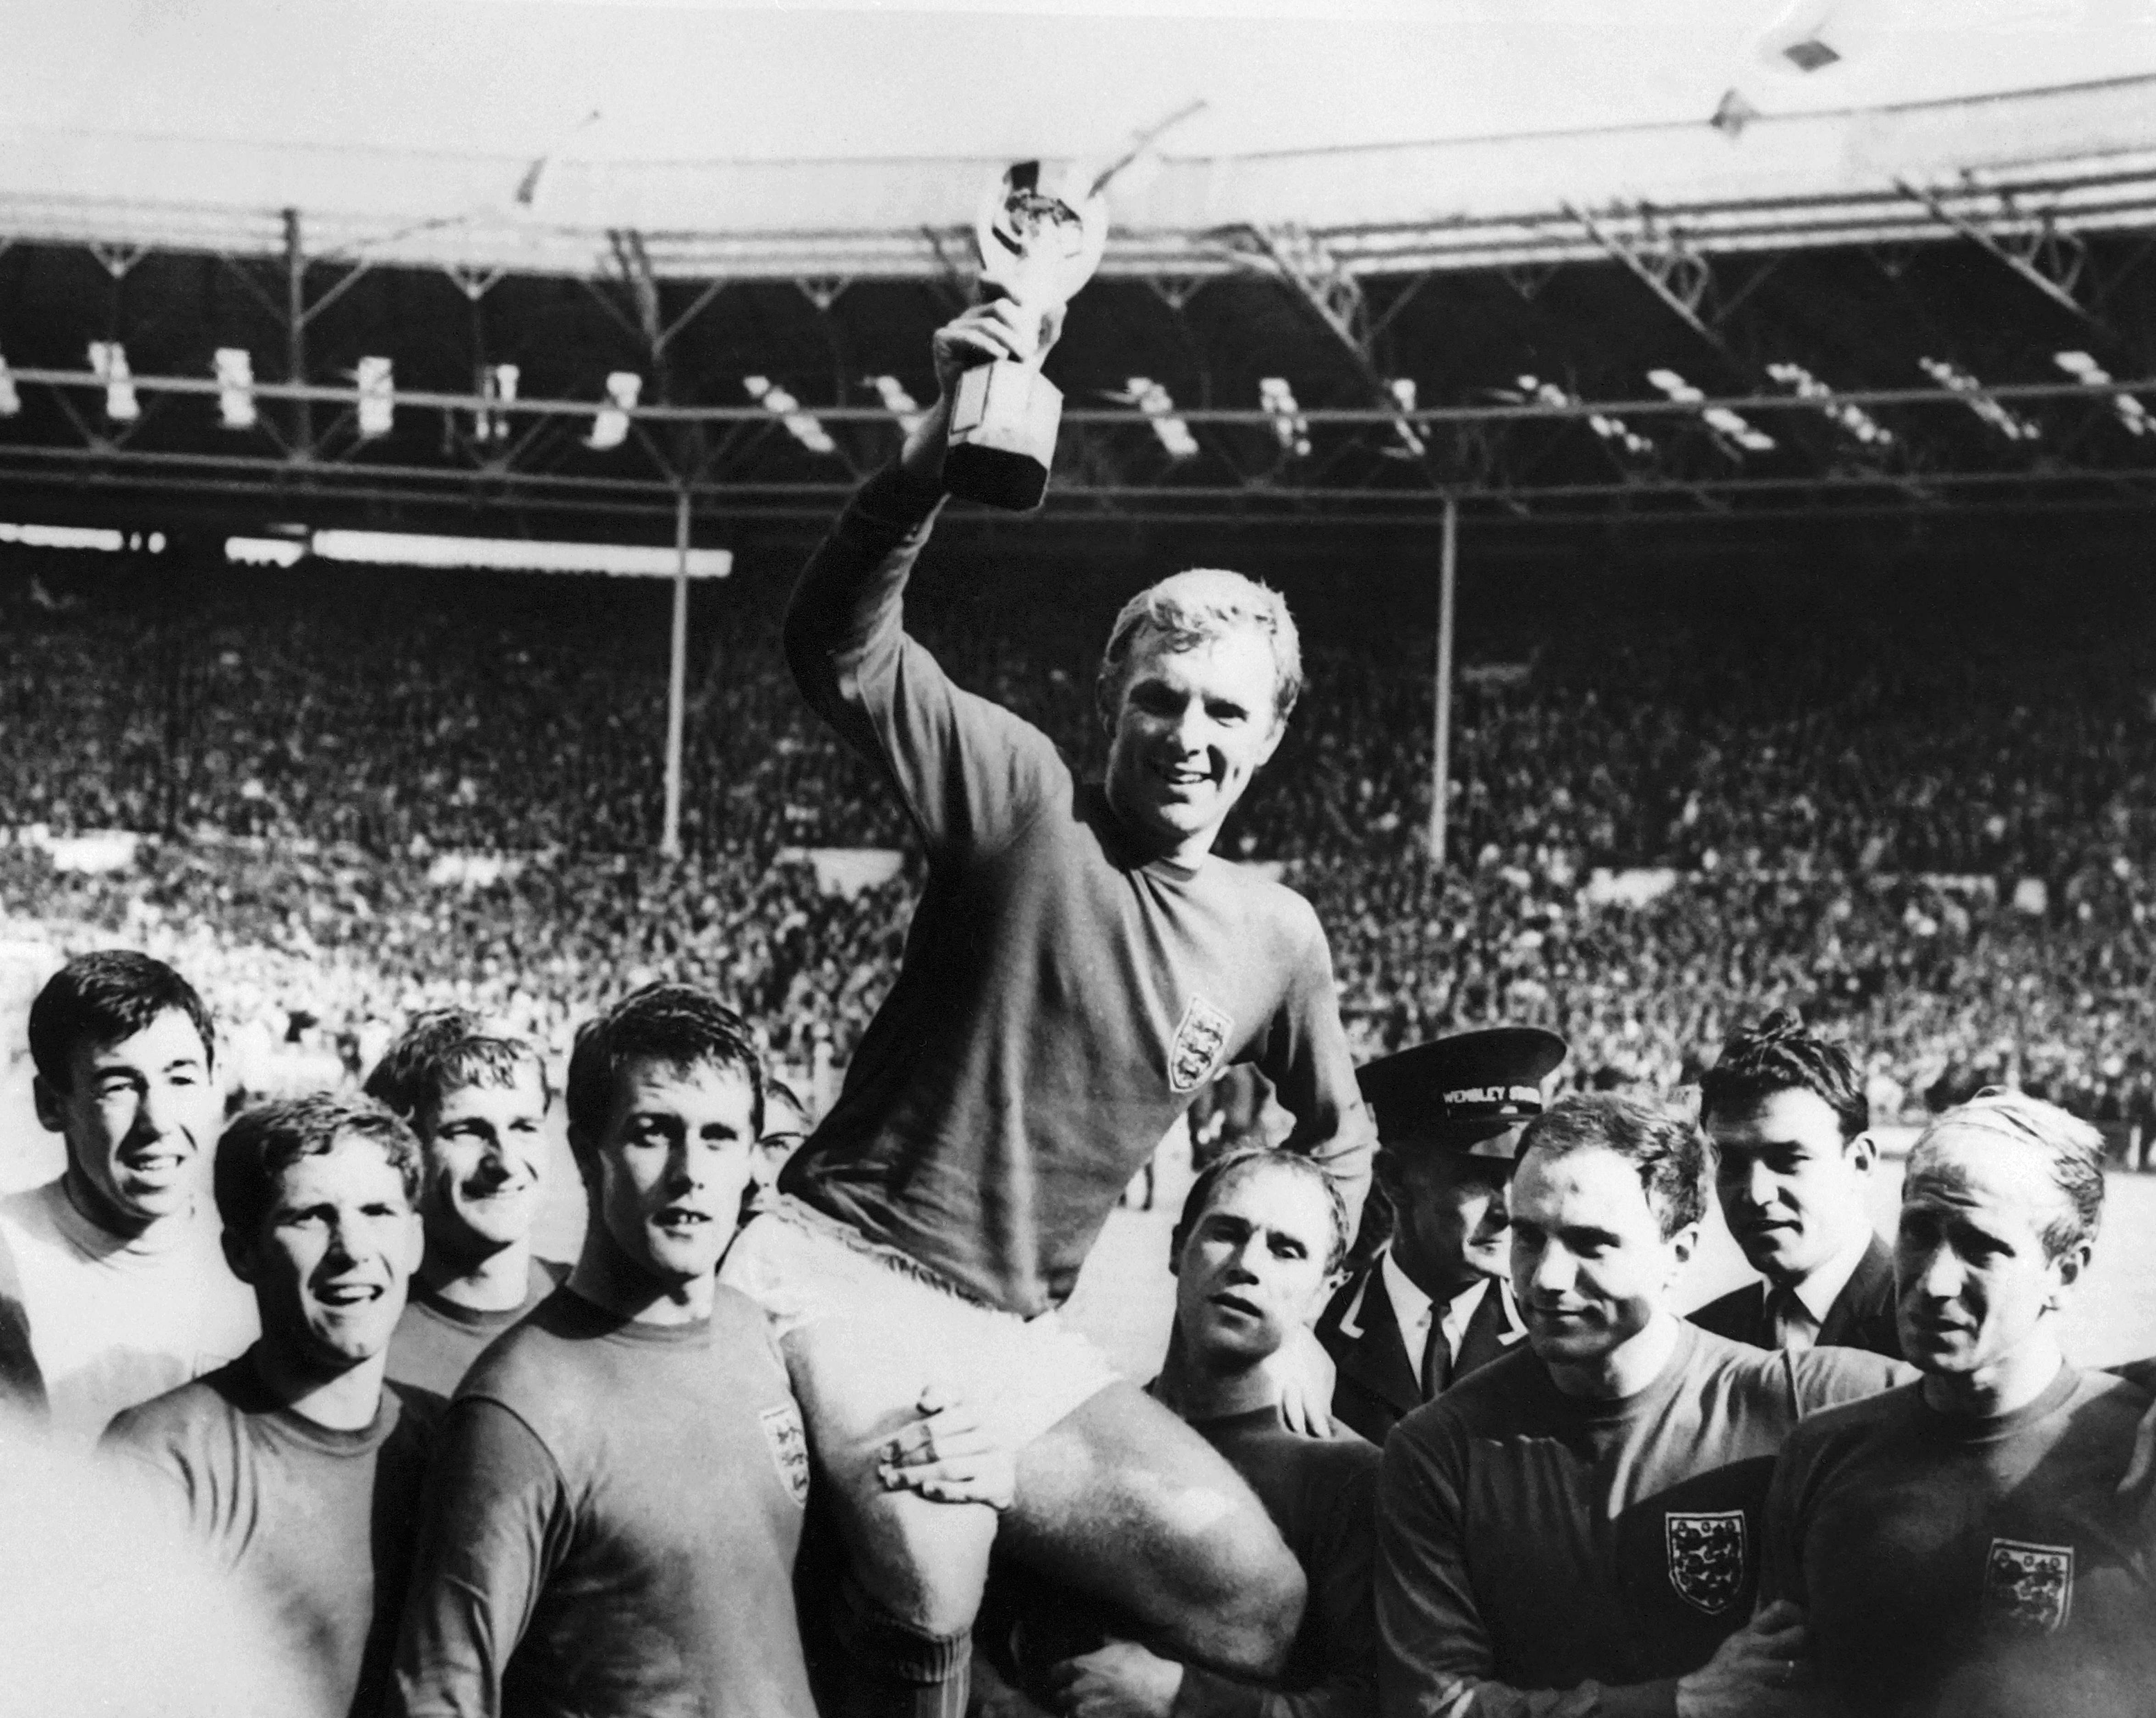 Hunt, third from left, celebrates with his World Cup-winning teammates at Wembley in 1966